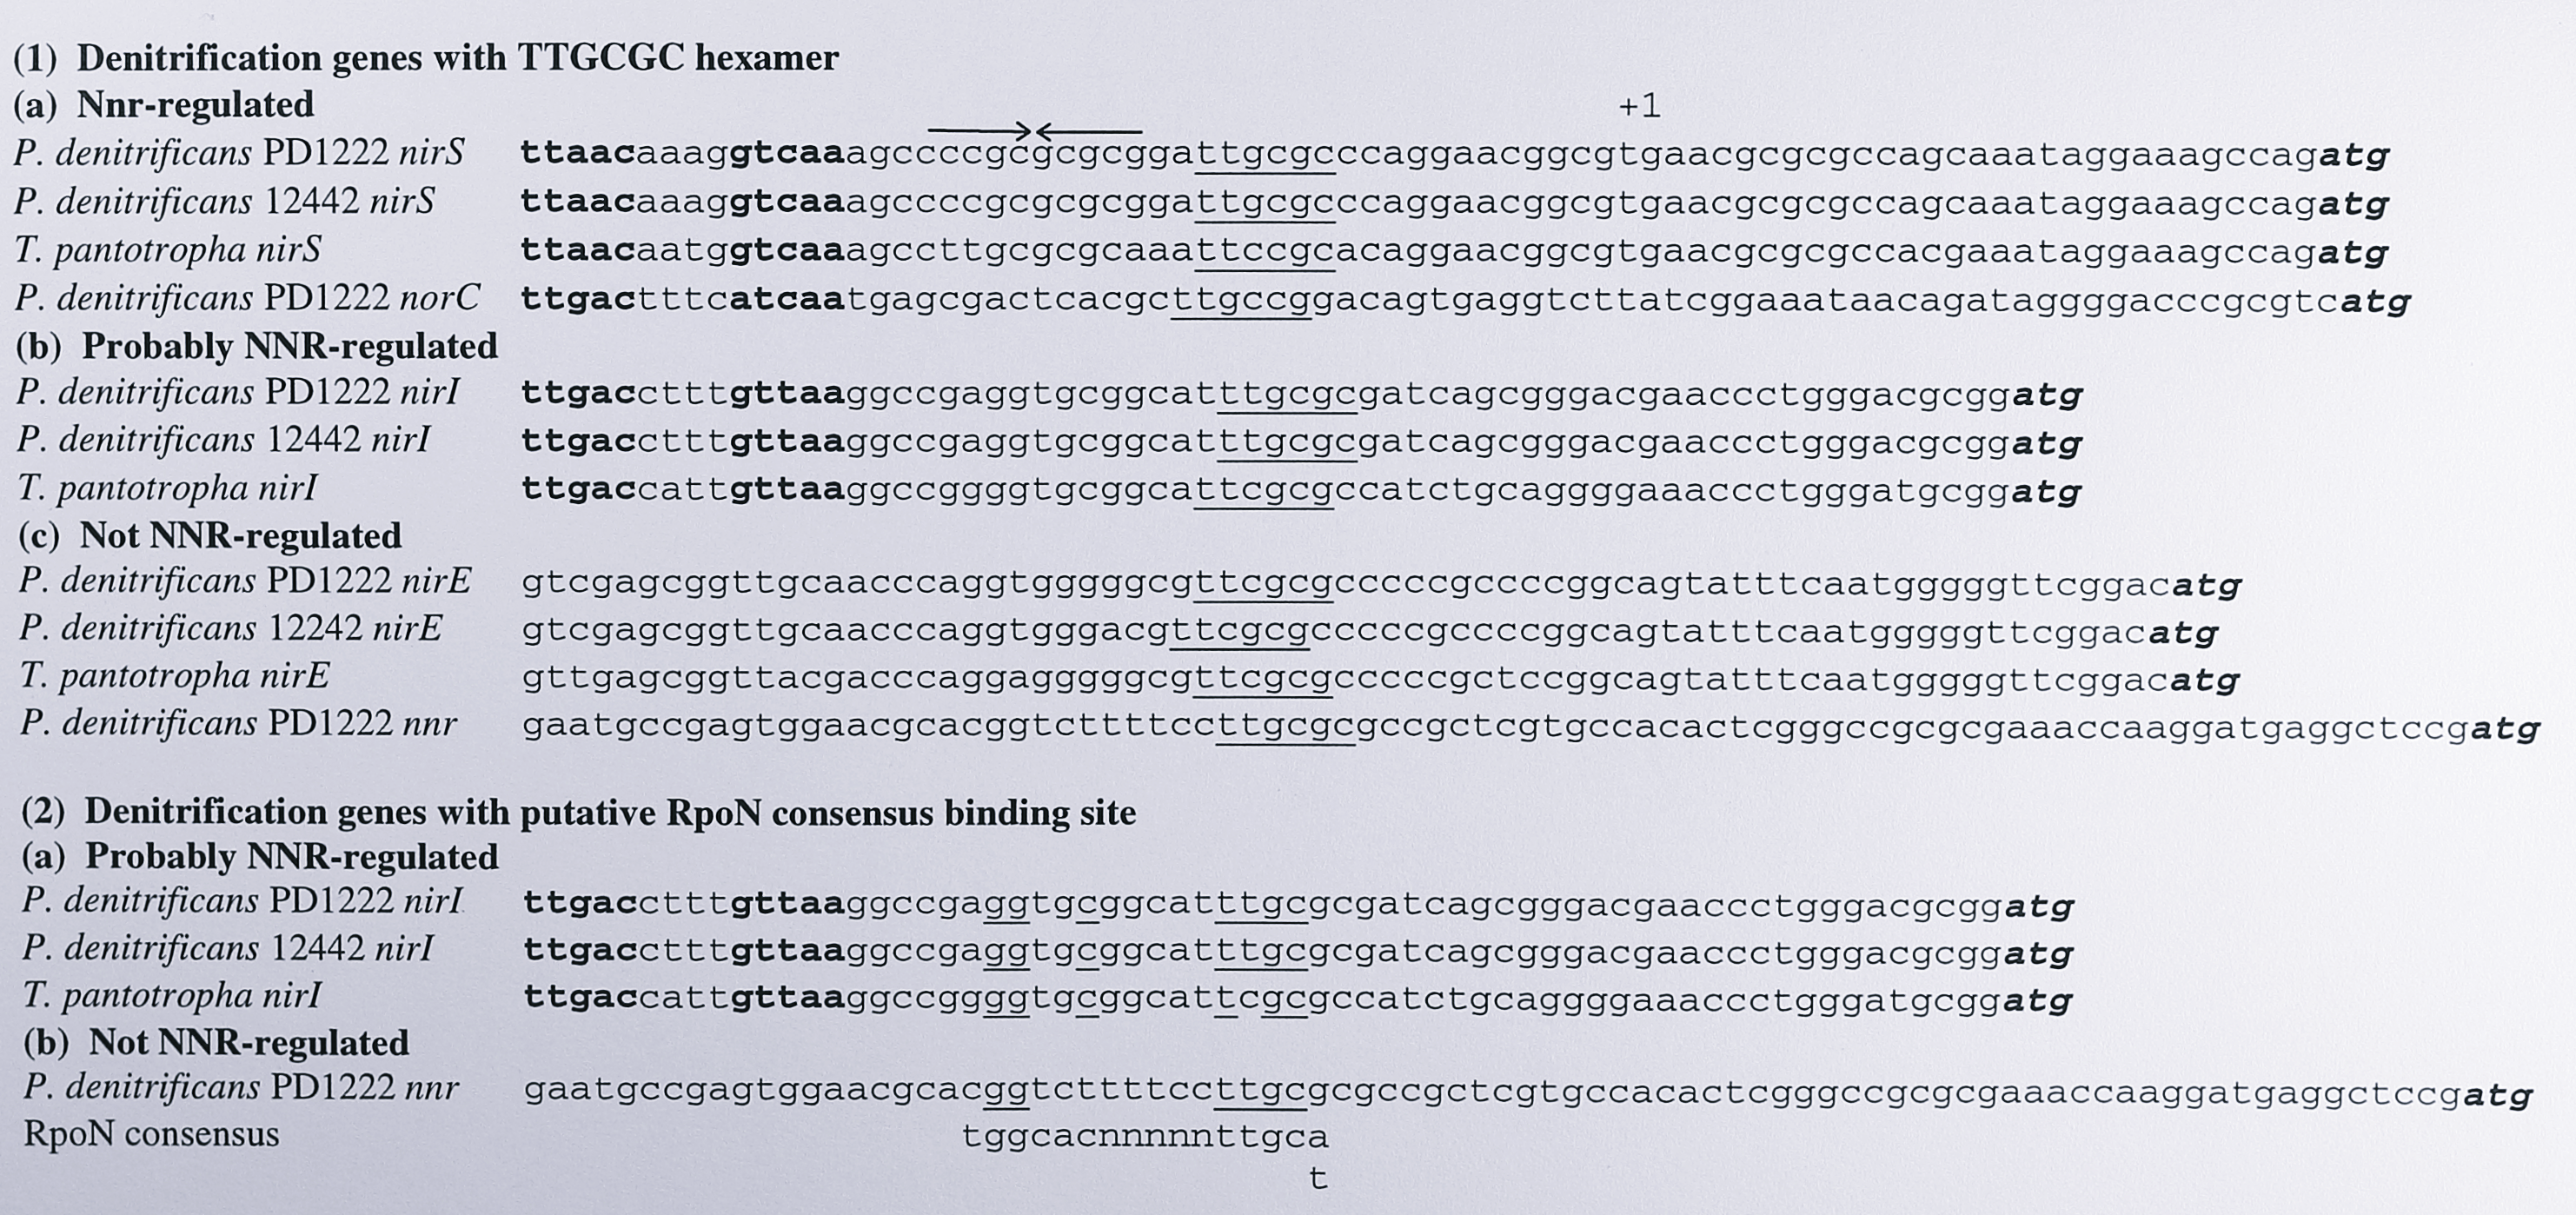 Alignments of the upstream regions of NNR-regulated genes from _P. denitrificans_ and _T. pantotropha_ showing regions of conserved sequence. Group 1 shows genes with the consensus hexamer TTGCGC in the upstream region. The _nirI_ gene is assumed to be regulated by NNR (see text for details). Also included are the non-NNR-regulated genes _nirE_ and _nnr_. Group 2 shows a consensus resembling the RpoN binding site in the _nirI_ and _nnr_ upstream regions. The NNR binding site is shown in bold, the ATG start codon is in bold-italic. In Group 1 the TTGCGC hexamer is underlined, in Group 2 residues matching the RpoN consensus are underlined. +1 indicates the transcription start site of the _nirS_ gene. A perfect 10 bp inverted repeat in the _nirS_ gene is indicated by inward-facing arrows. Sequence data for _P. denitrificans_ PD1222 and _P. denitrificans_ 12442 was taken from GenBank accession number U05002 and Ohshima et. al. (1993) [@ohshima_cloning_1993], respectively.